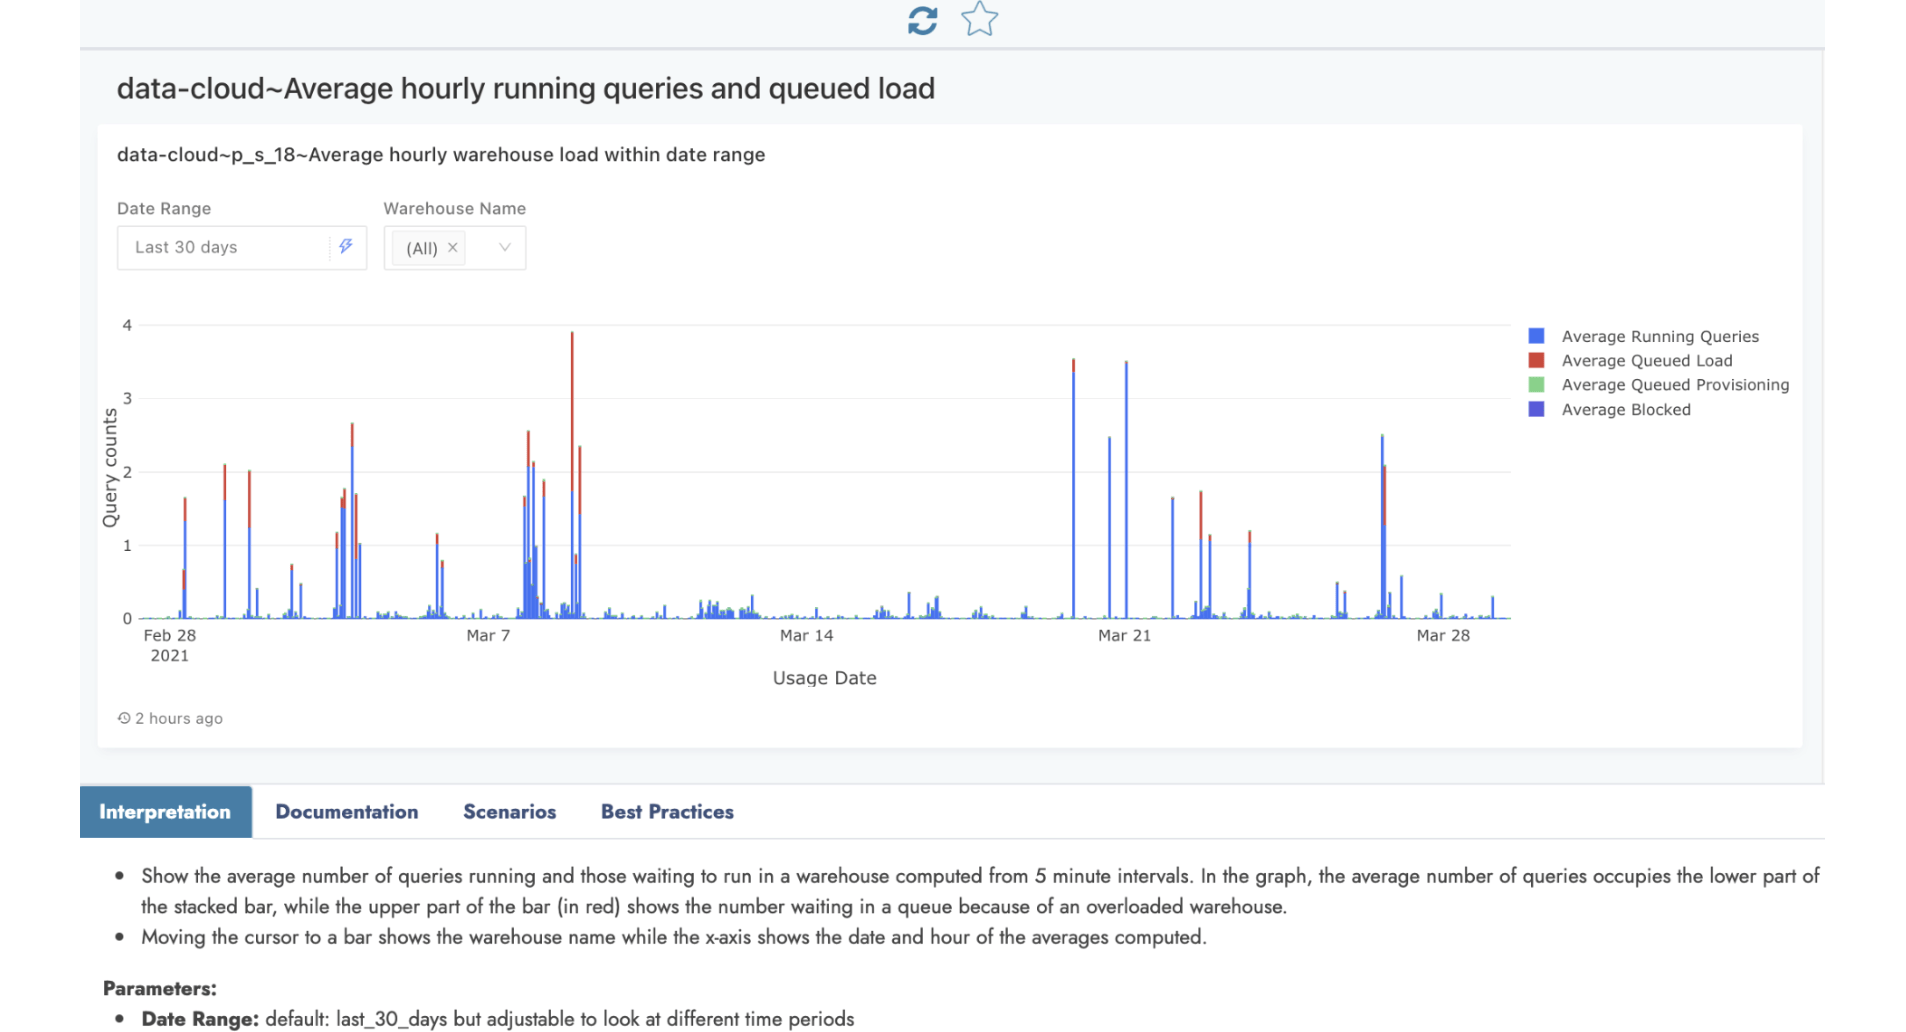 Average hourly running queries and queued load